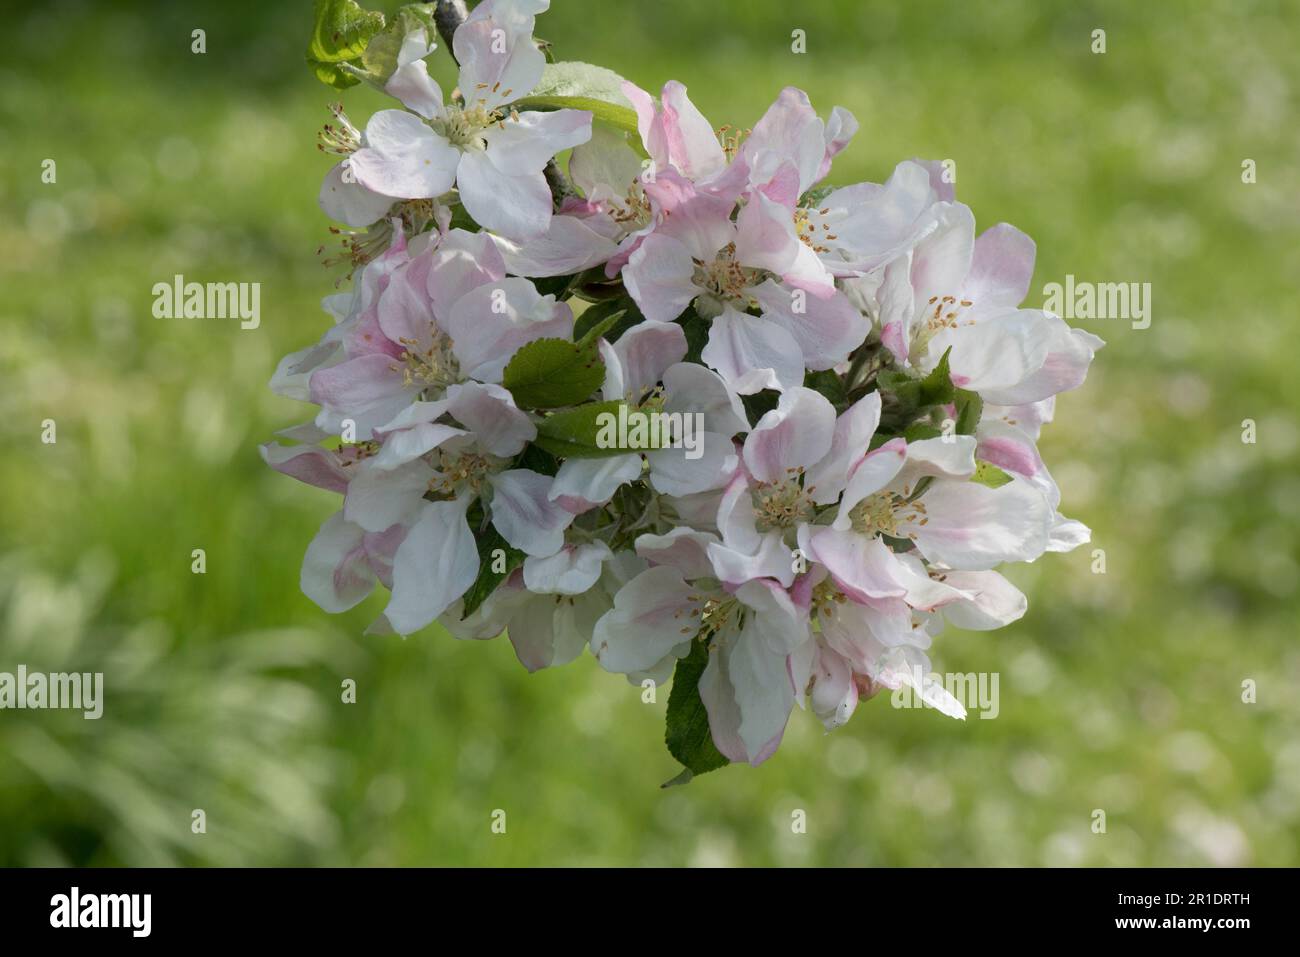 White and pink blossom on an Egremont Russet eating apple tree (Malus domestica) with young leaves in spring, Berkshire, May Stock Photo